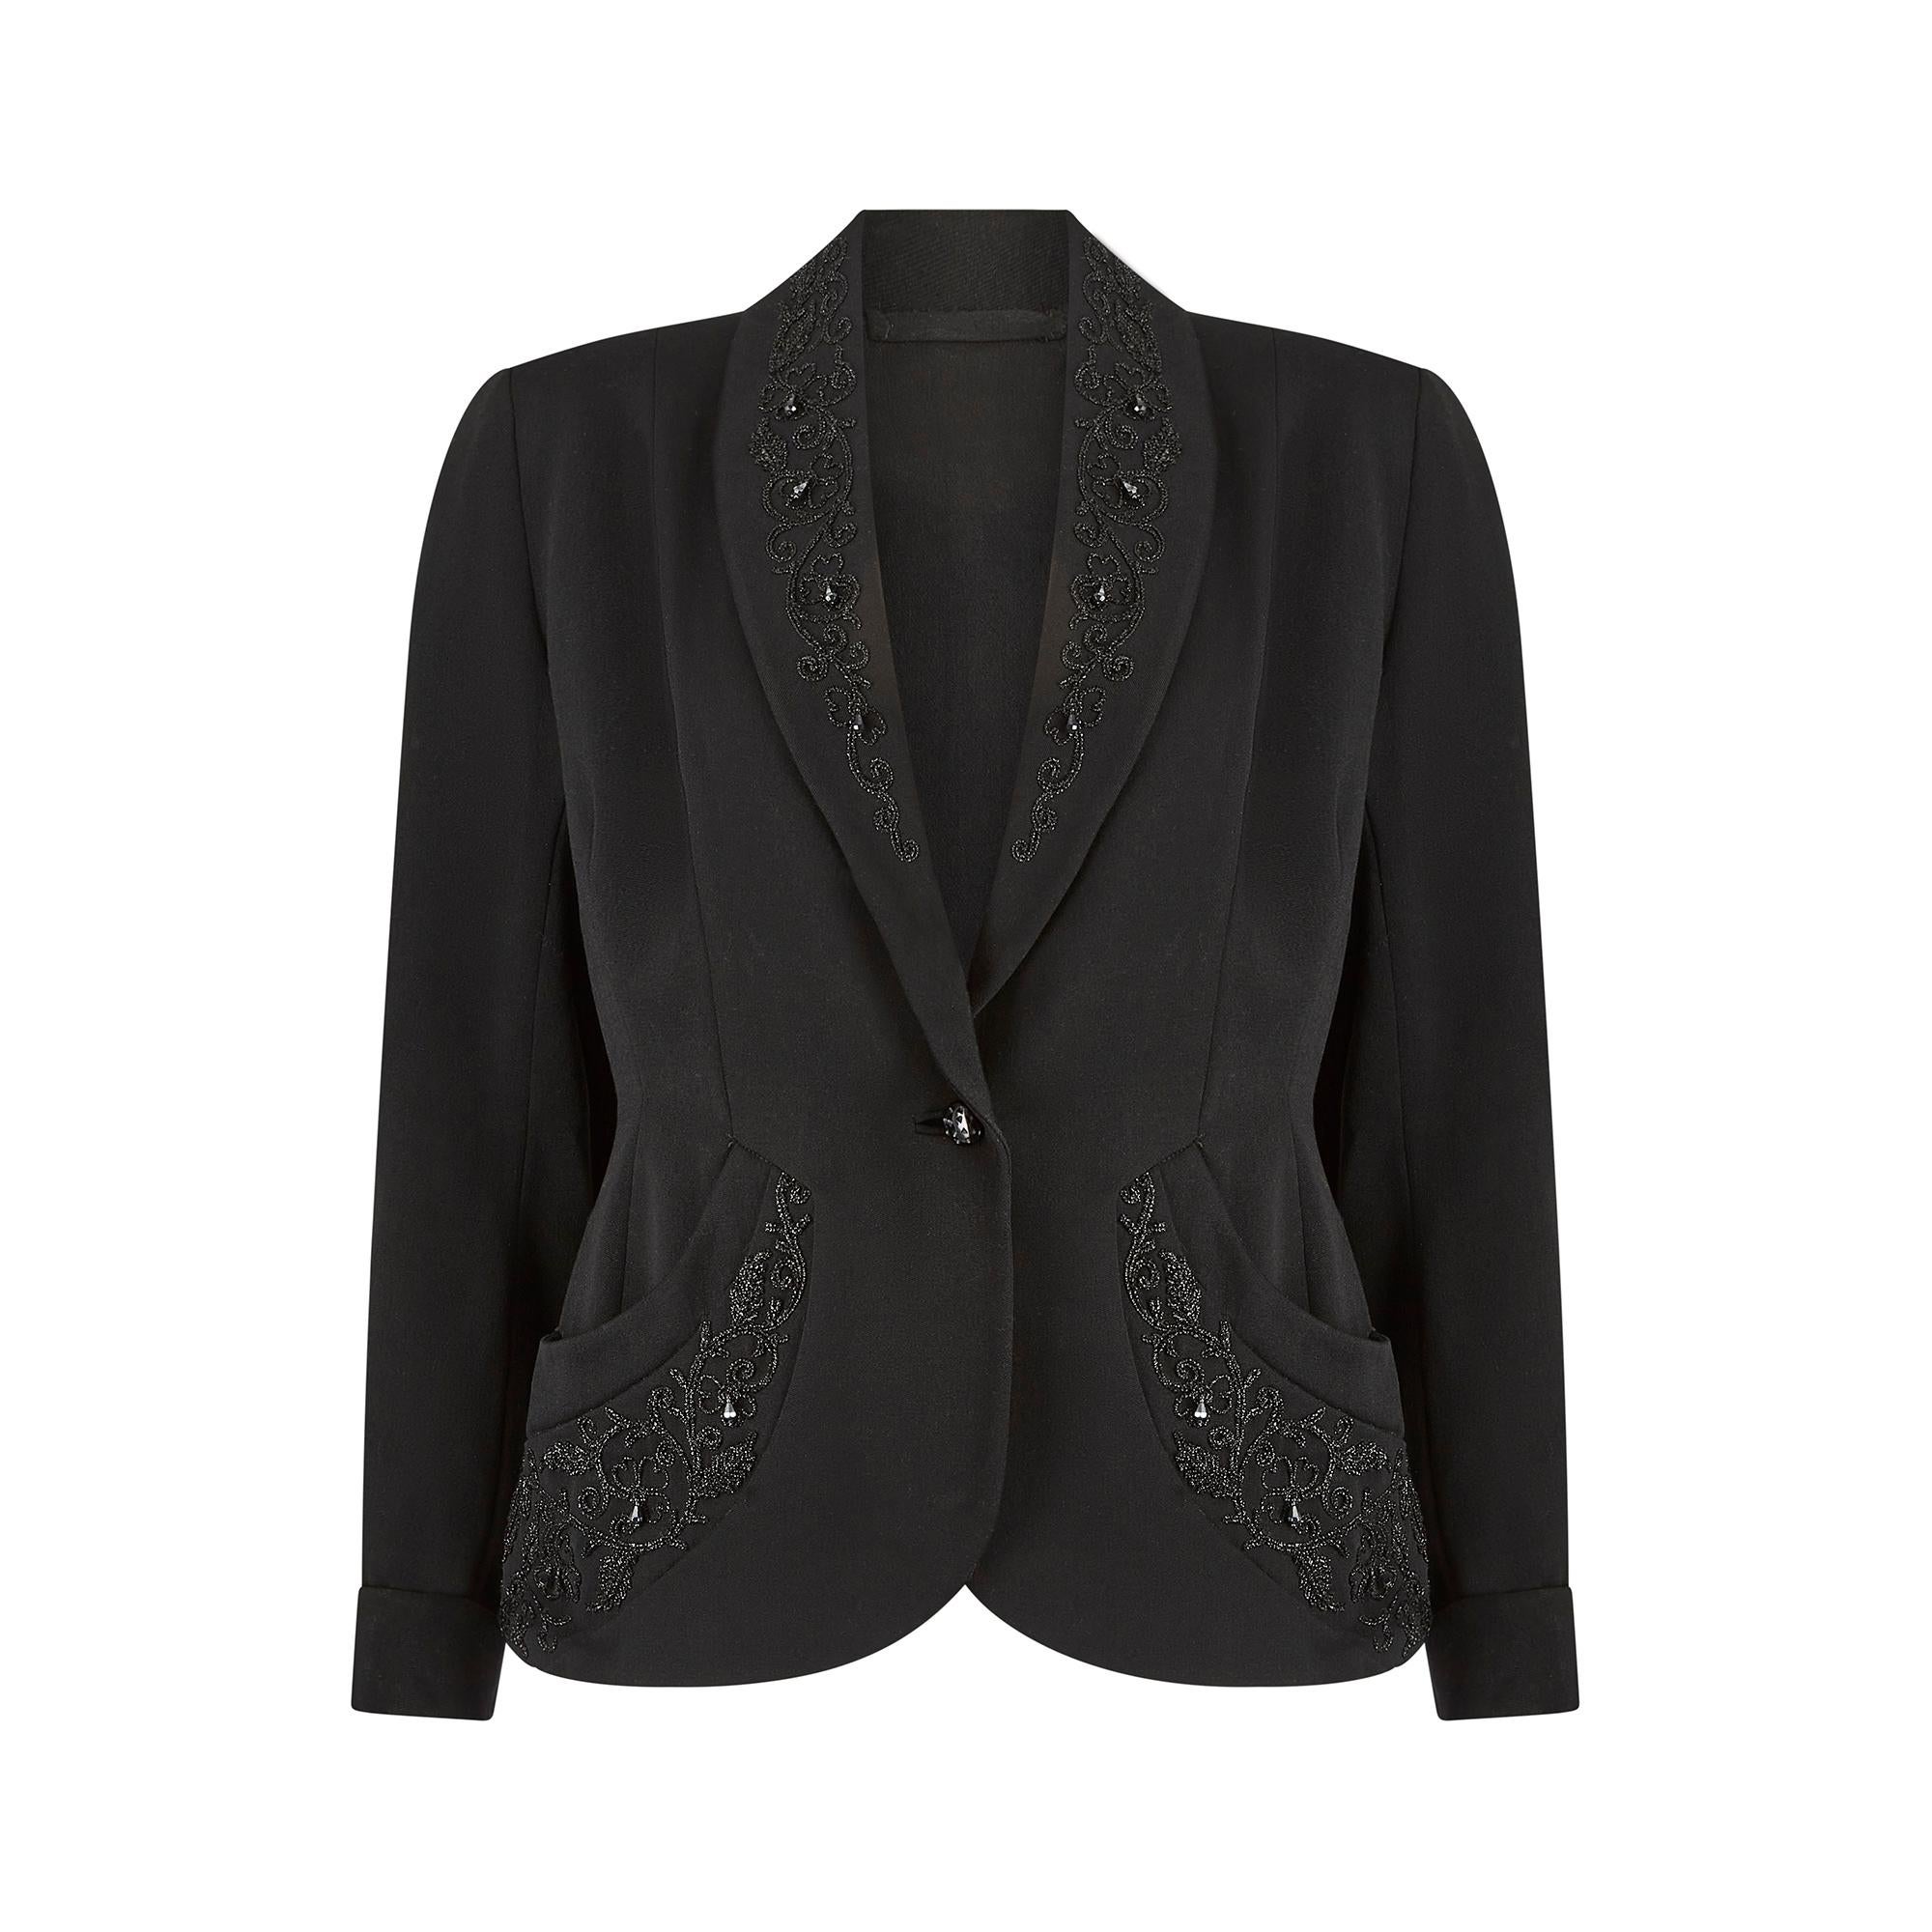 This late 1940s Sally Slade black blazer jacket has the most incredible beaded detail on the lapels and pockets. It is cut in a classic New Look 'bar' style shape, with rounded front hem and long lapels. It has original padding in each shoulder to